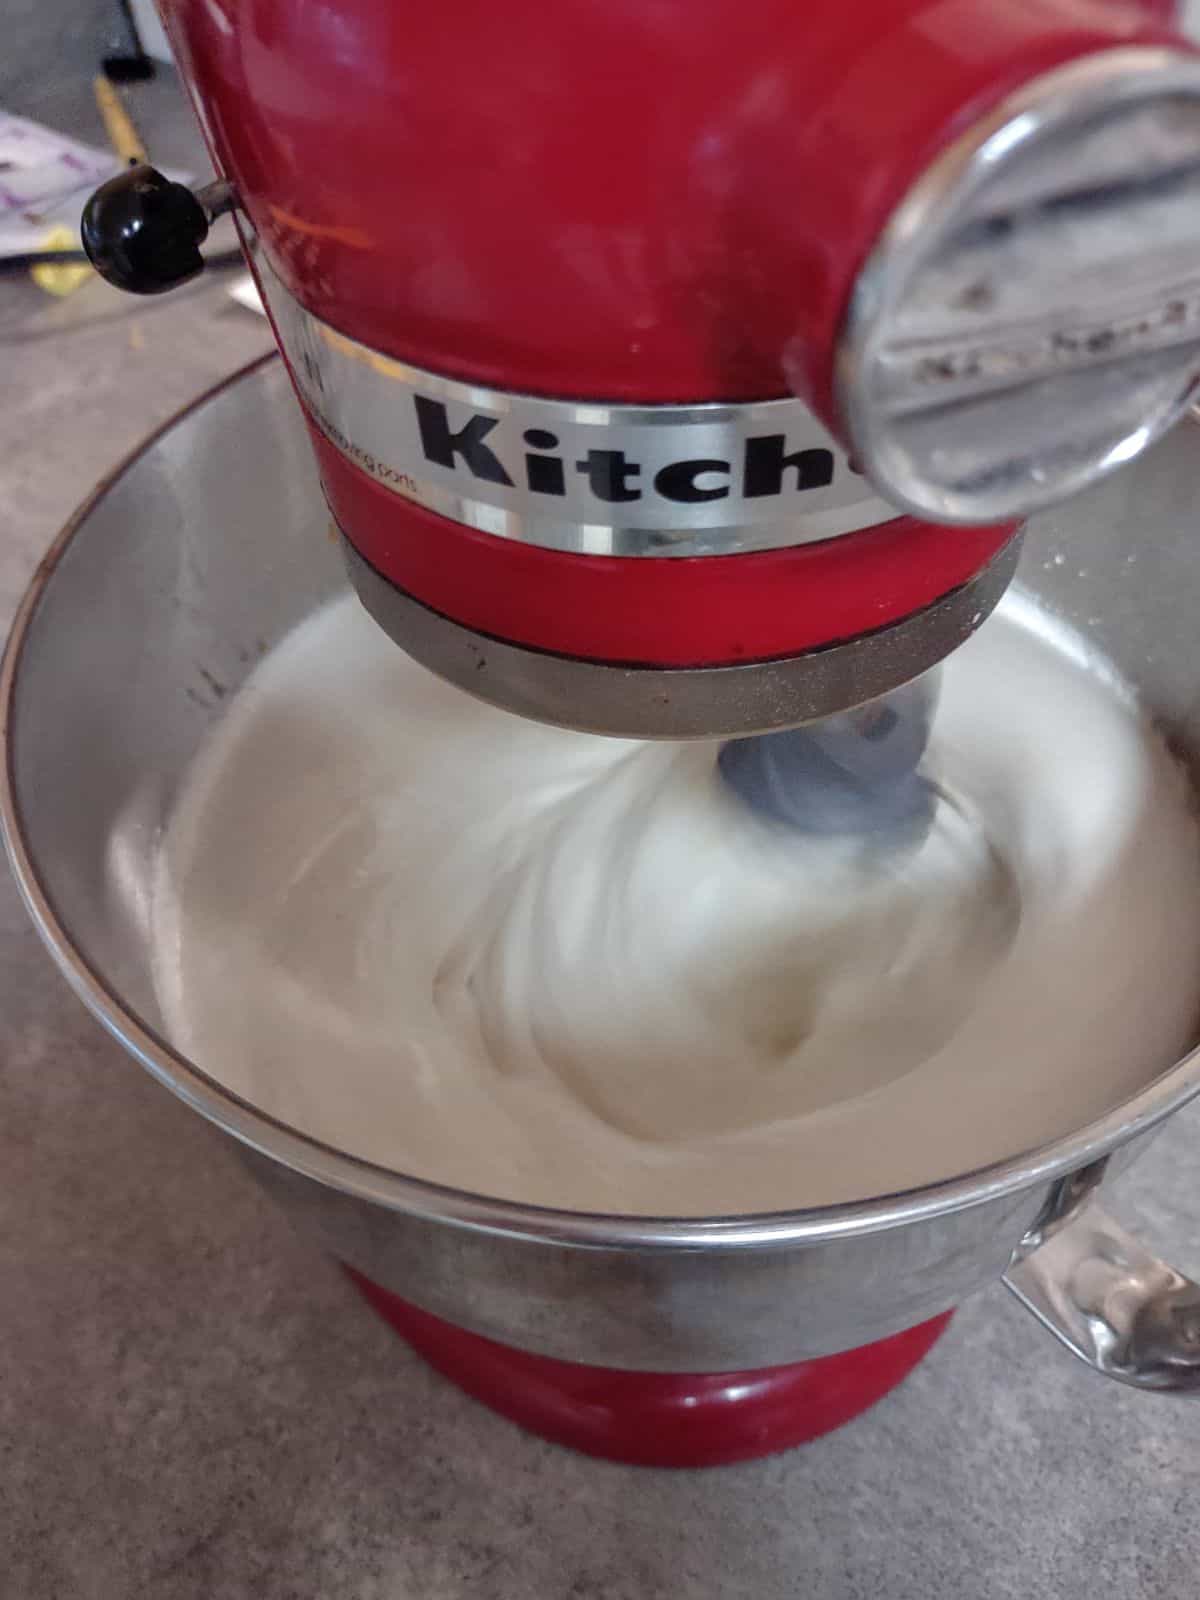 Red KitchenAid Stand Mixer with marshmallows being whipped inside the bowl.